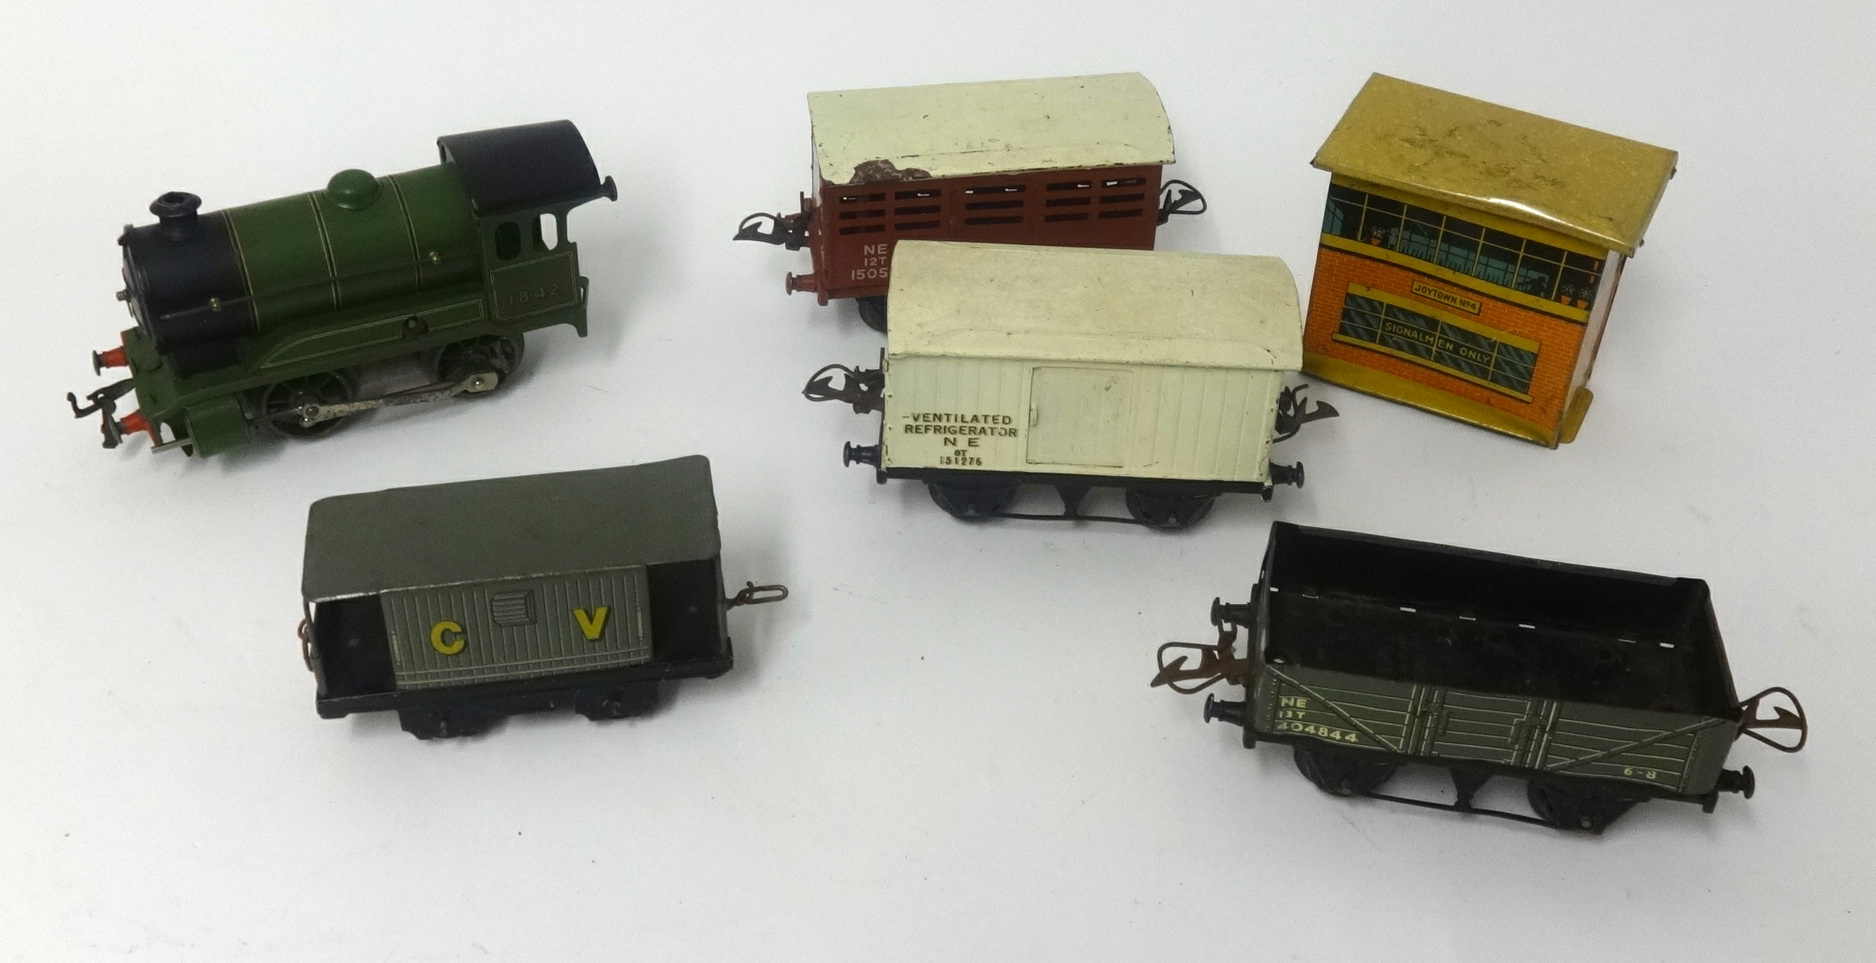 Hornby, tin plate and clockwork various model railways, tracks, wagons etc in old wood box.